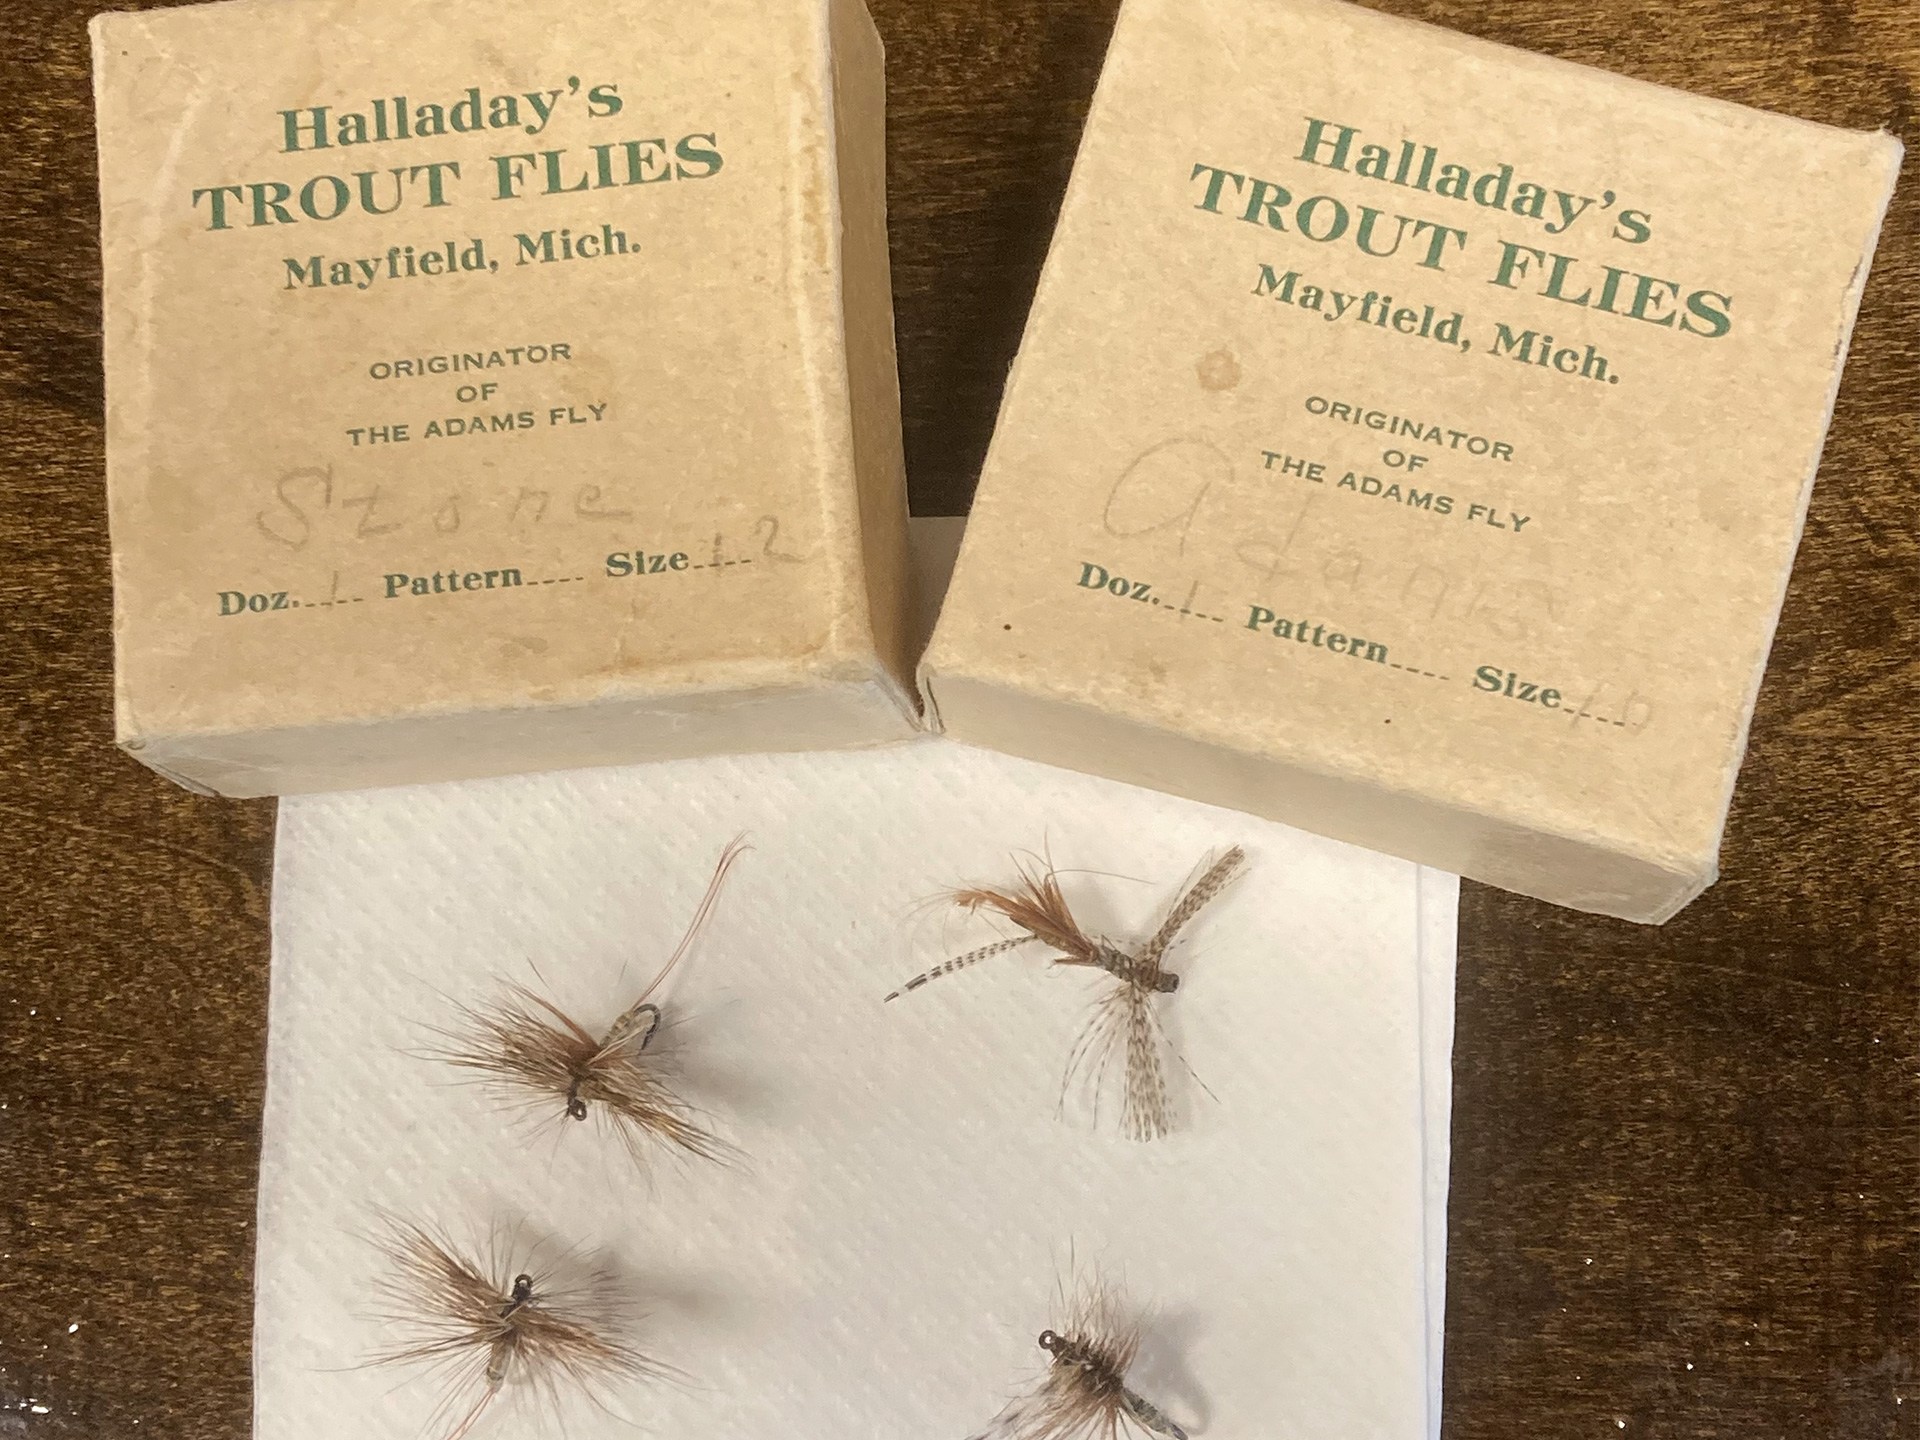 Samples of Halladay's Michigan Trout Flies